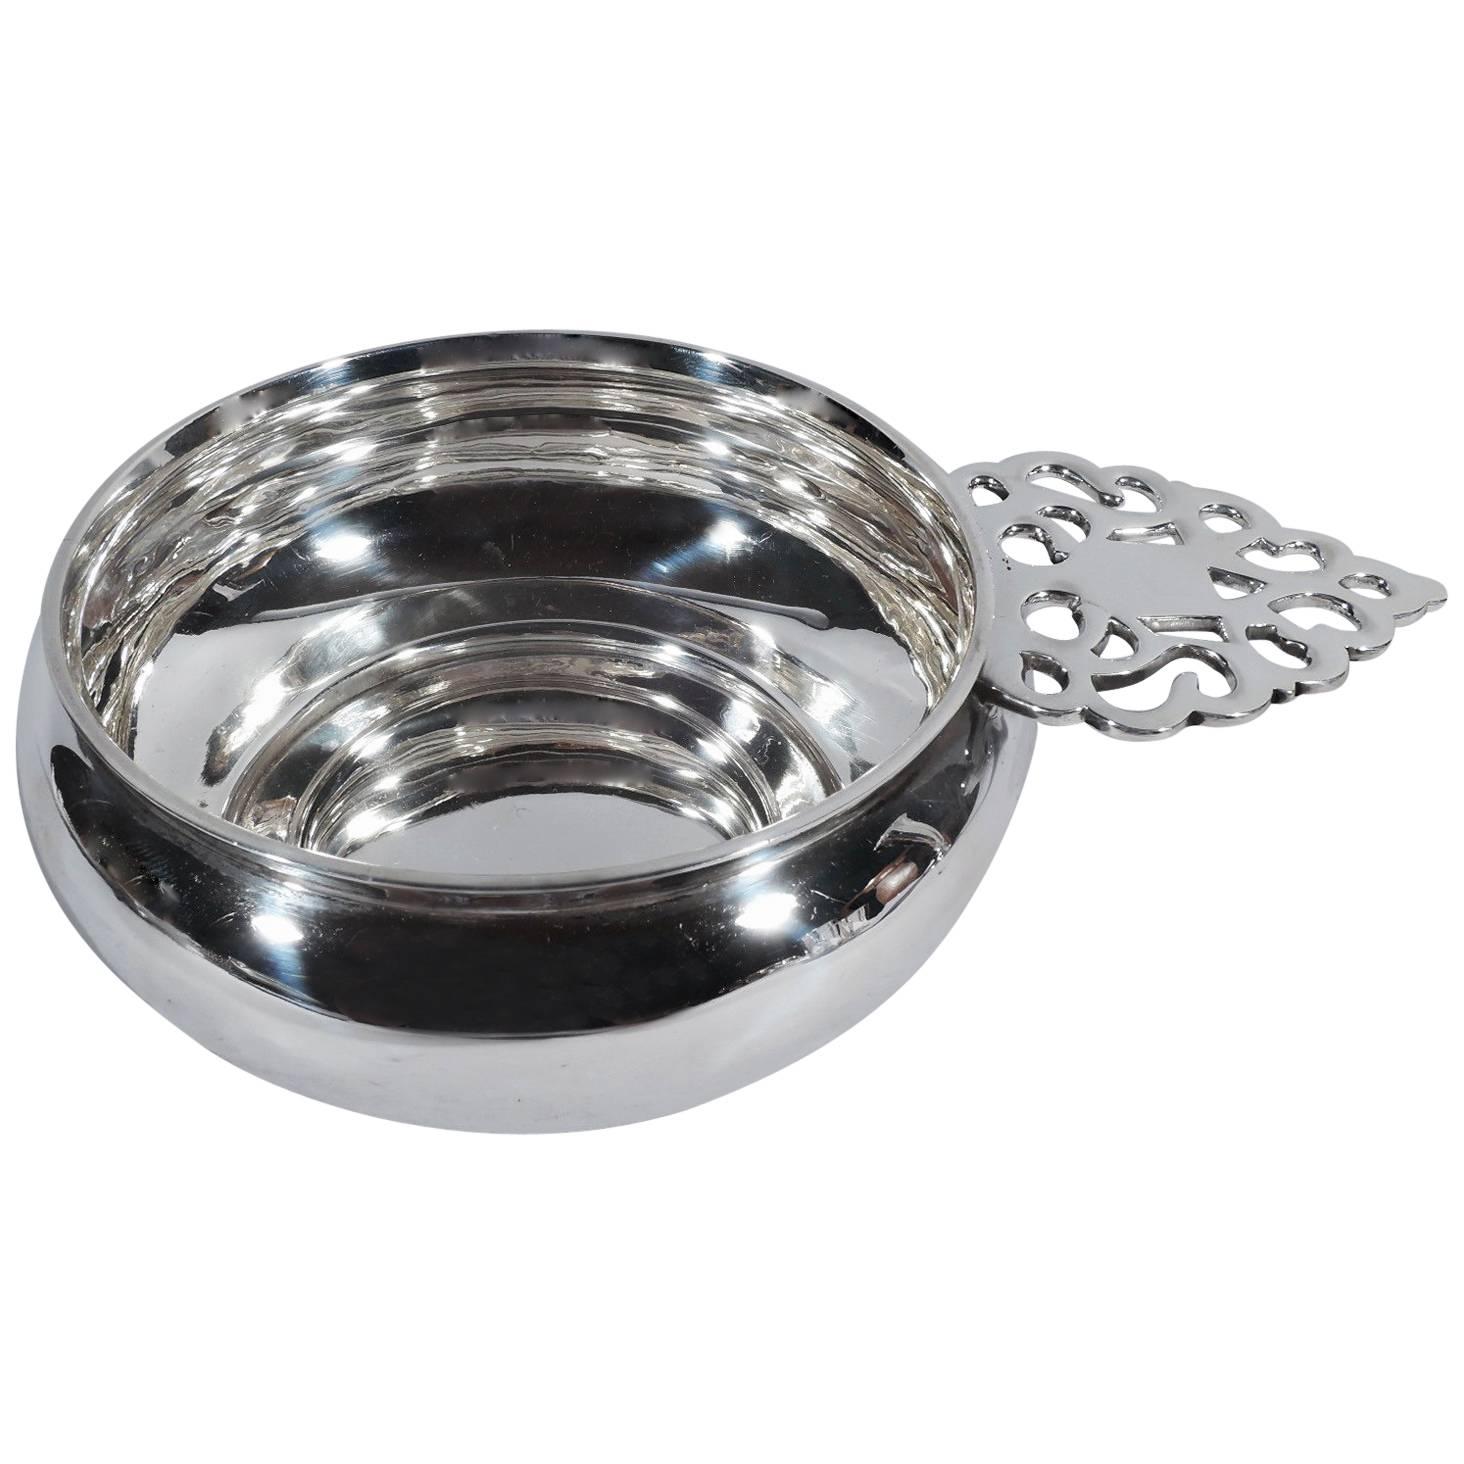 Traditional American Sterling Silver Porringer by Goodnow & Jenks